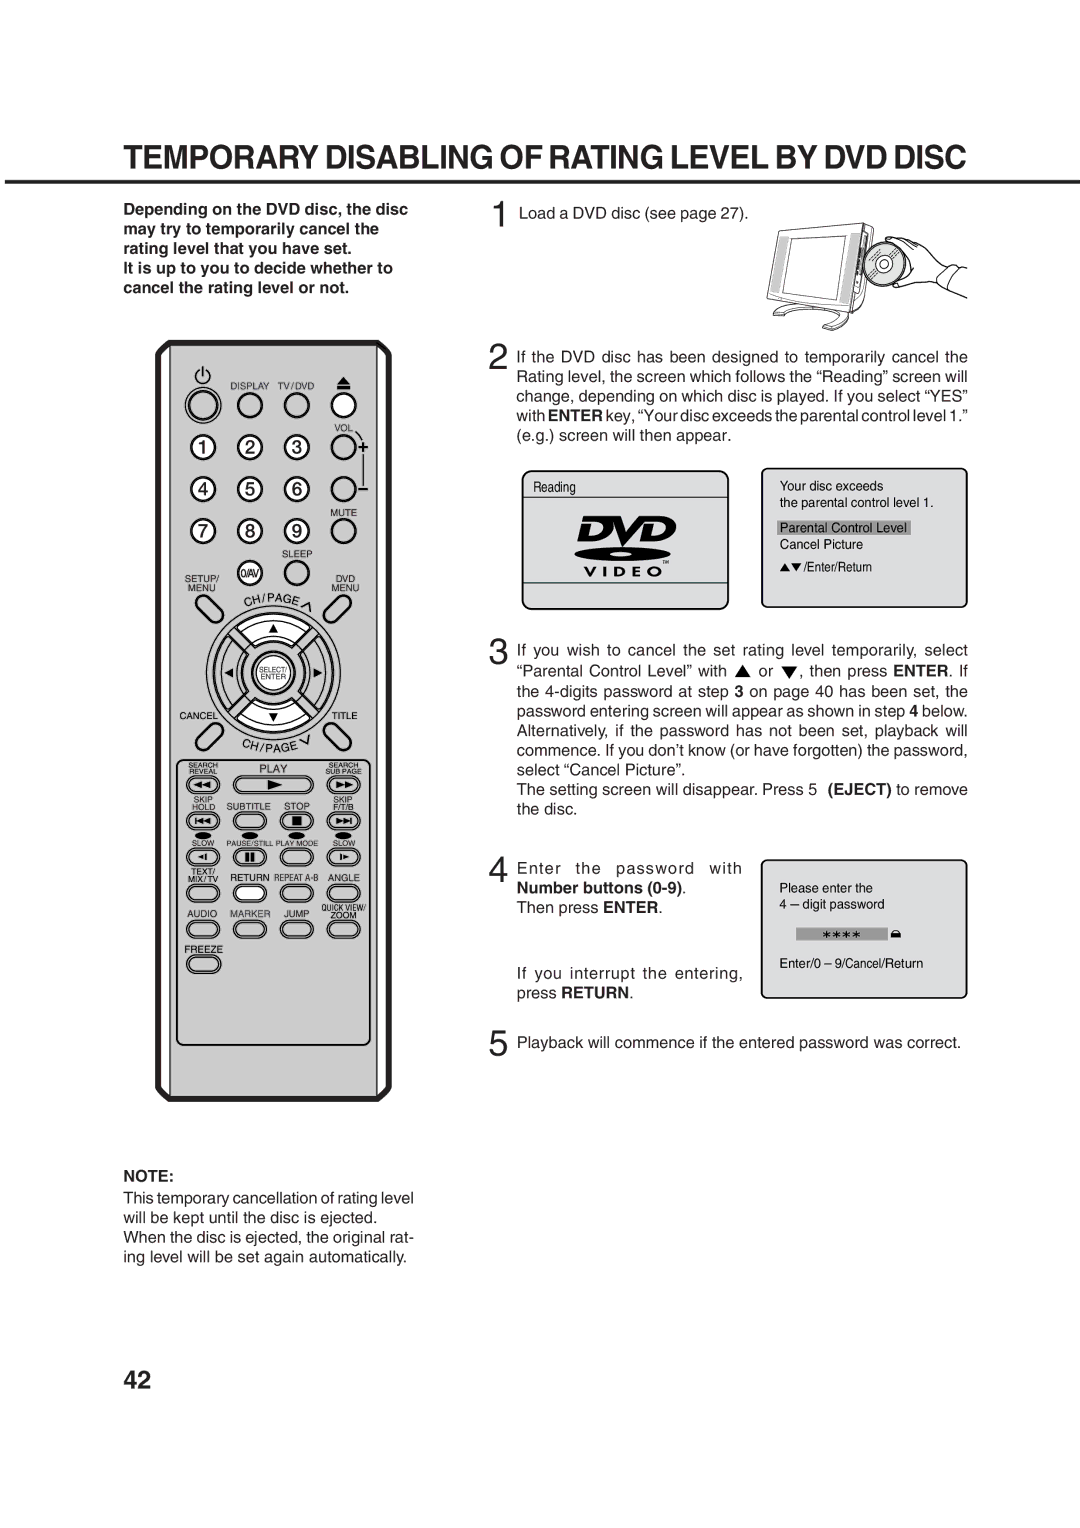 Orion 14LD manual Temporary Disabling of Rating Level by DVD Disc, Number buttons 